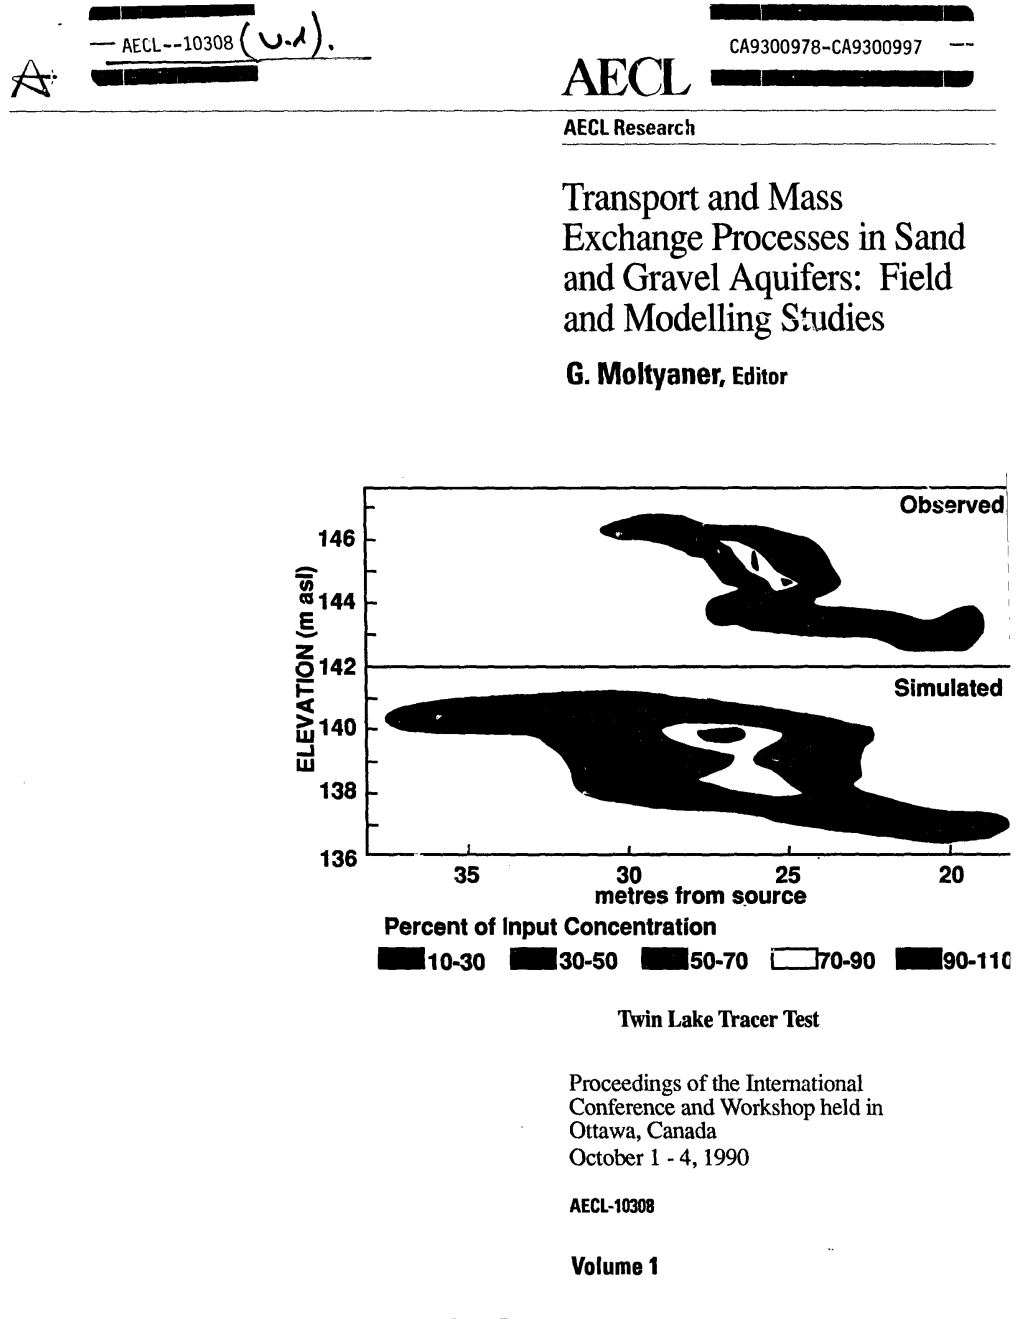 Transport and Mass Exchange Processes in Sand and Gravel Aquifers: Field and Modelling Studies